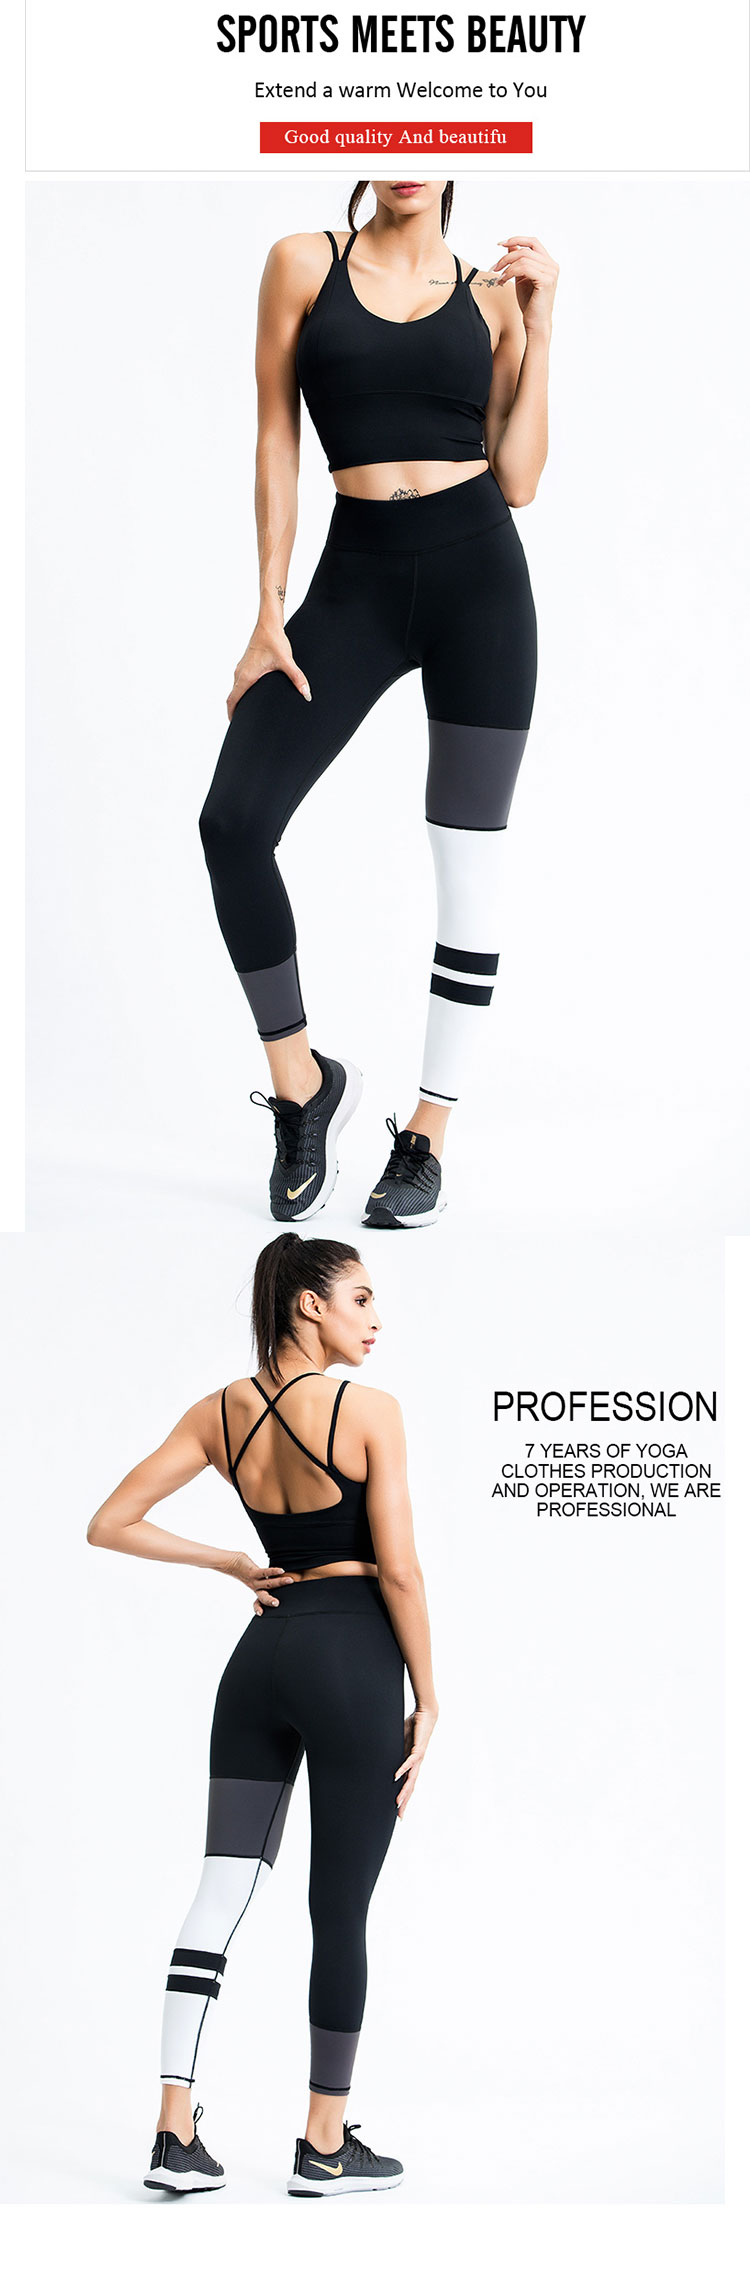 Girls-running-leggings-continues-to-penetrate-into-mainstream-clothing